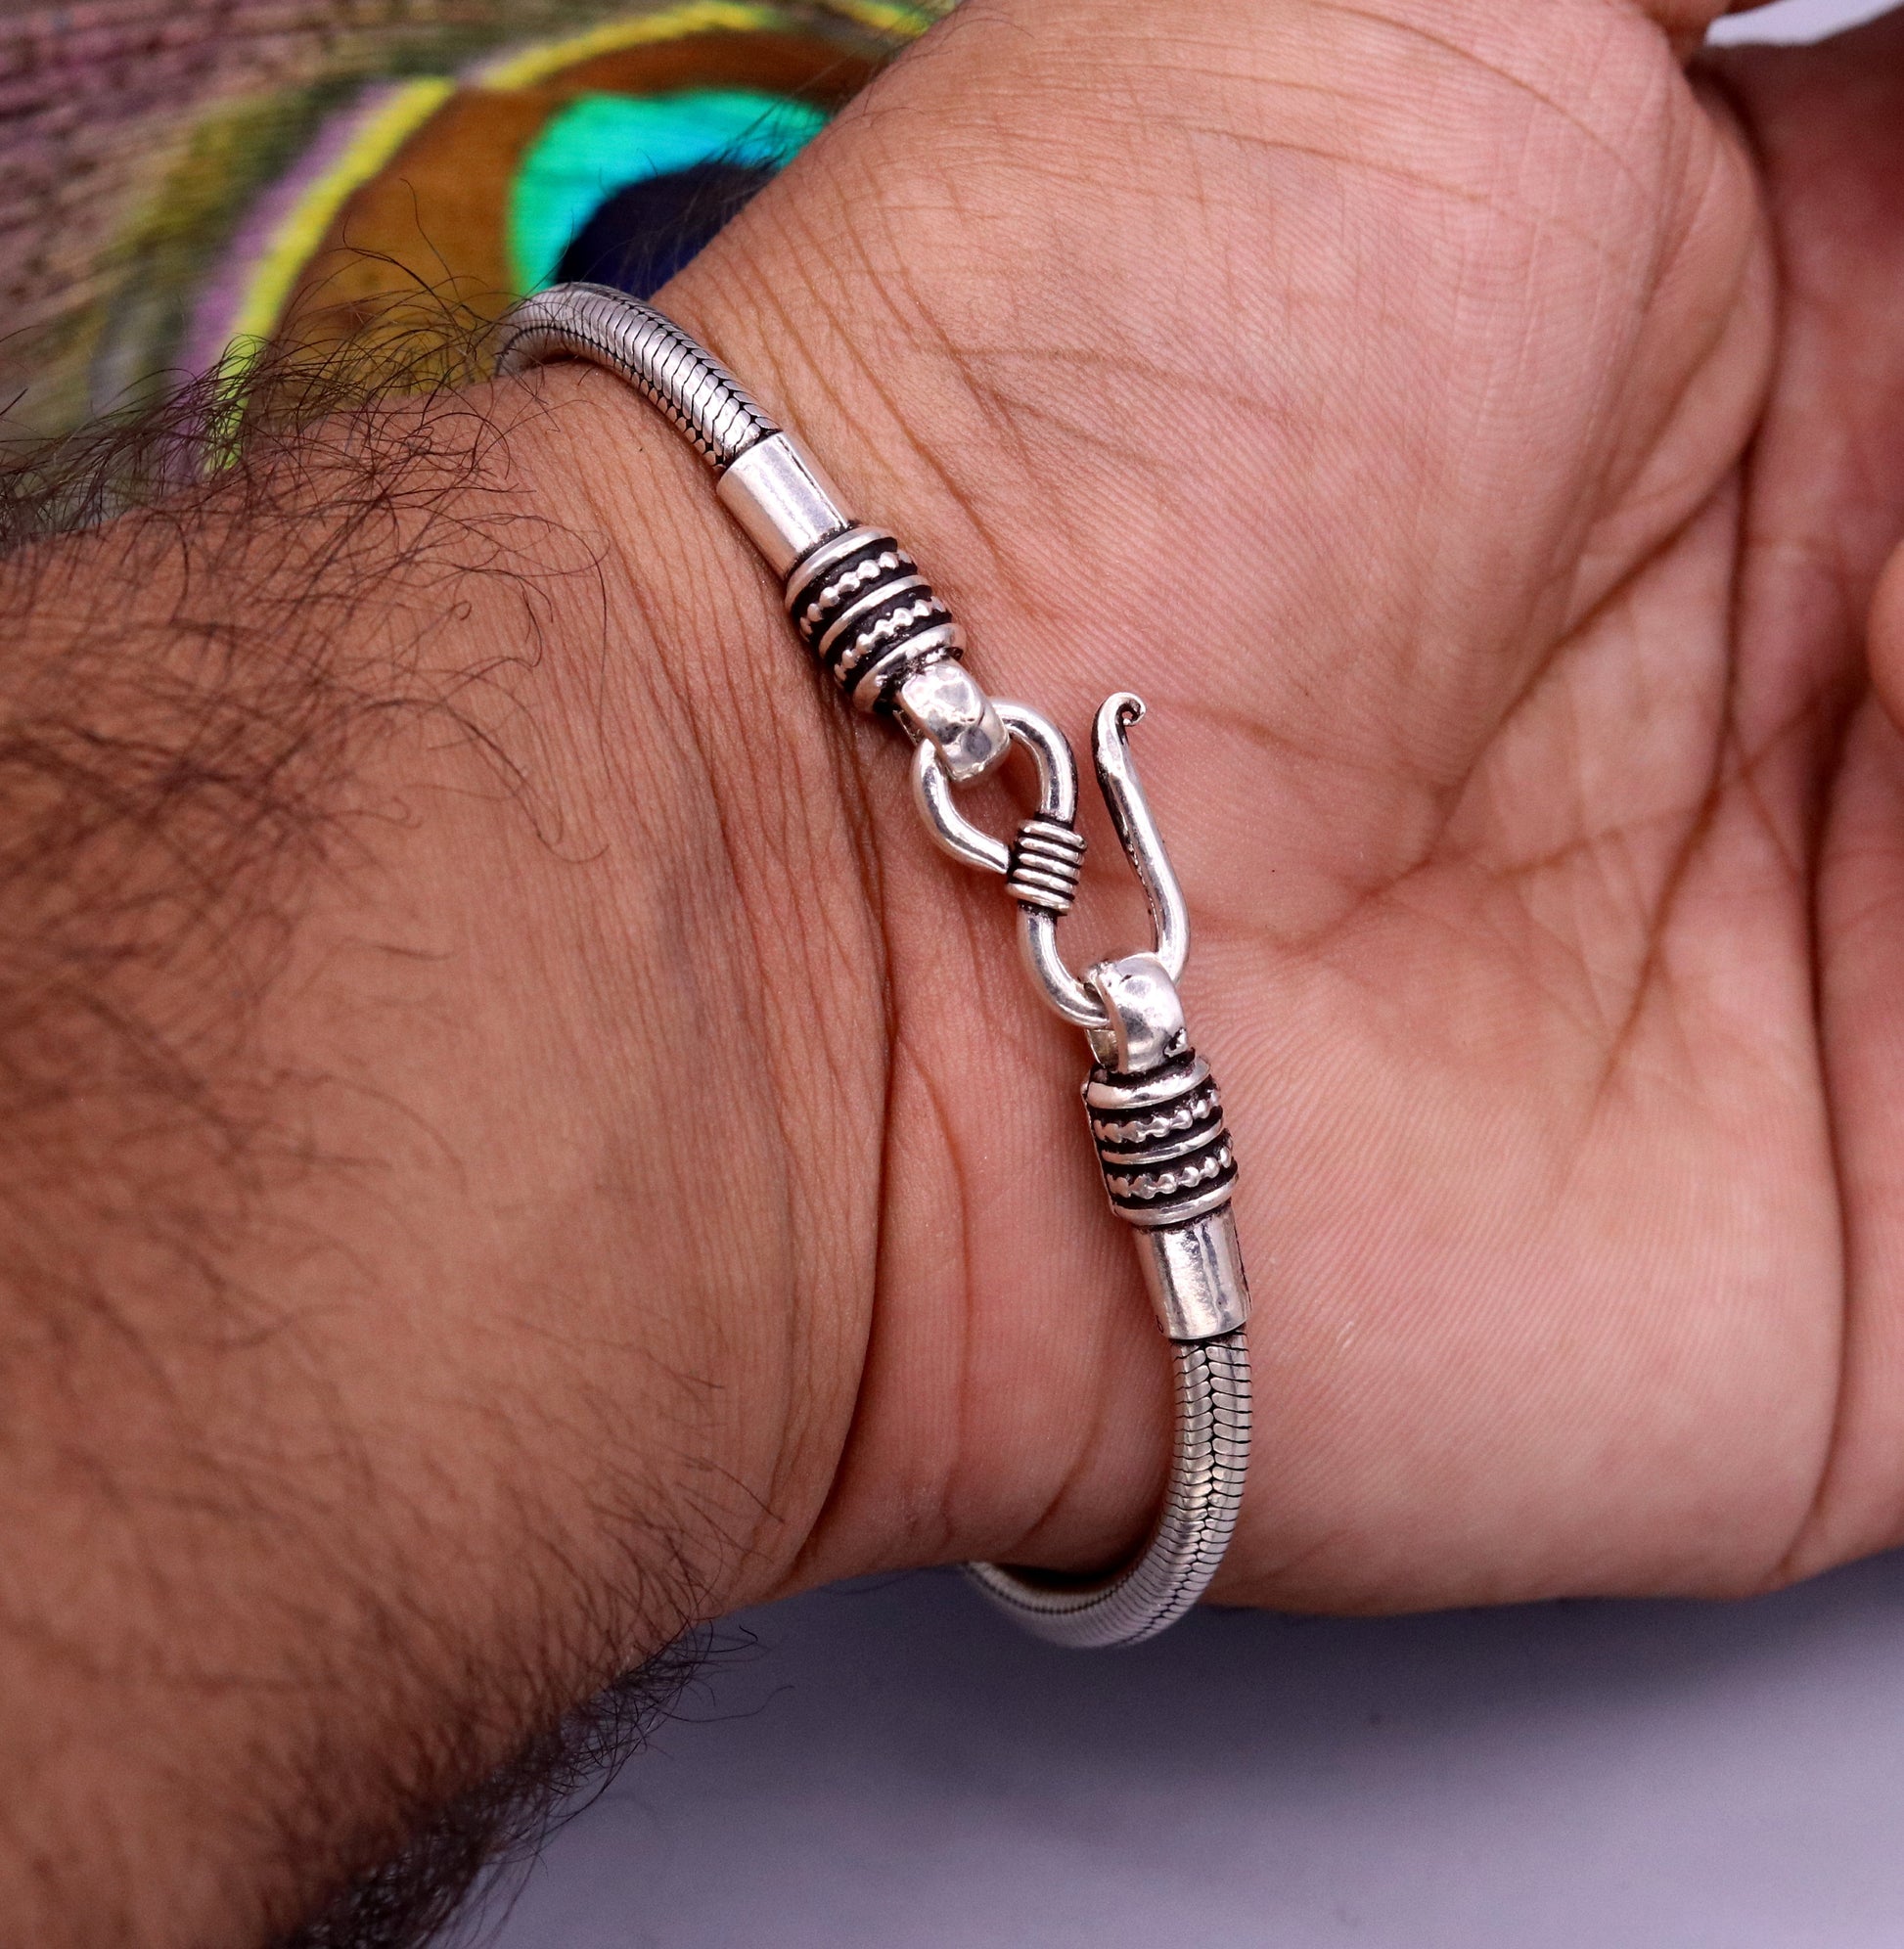 4mm  925 sterling silver handmade amazing inches snake chain flexible unisex bracelet jewelry from Rajasthan india sbr47 - TRIBAL ORNAMENTS